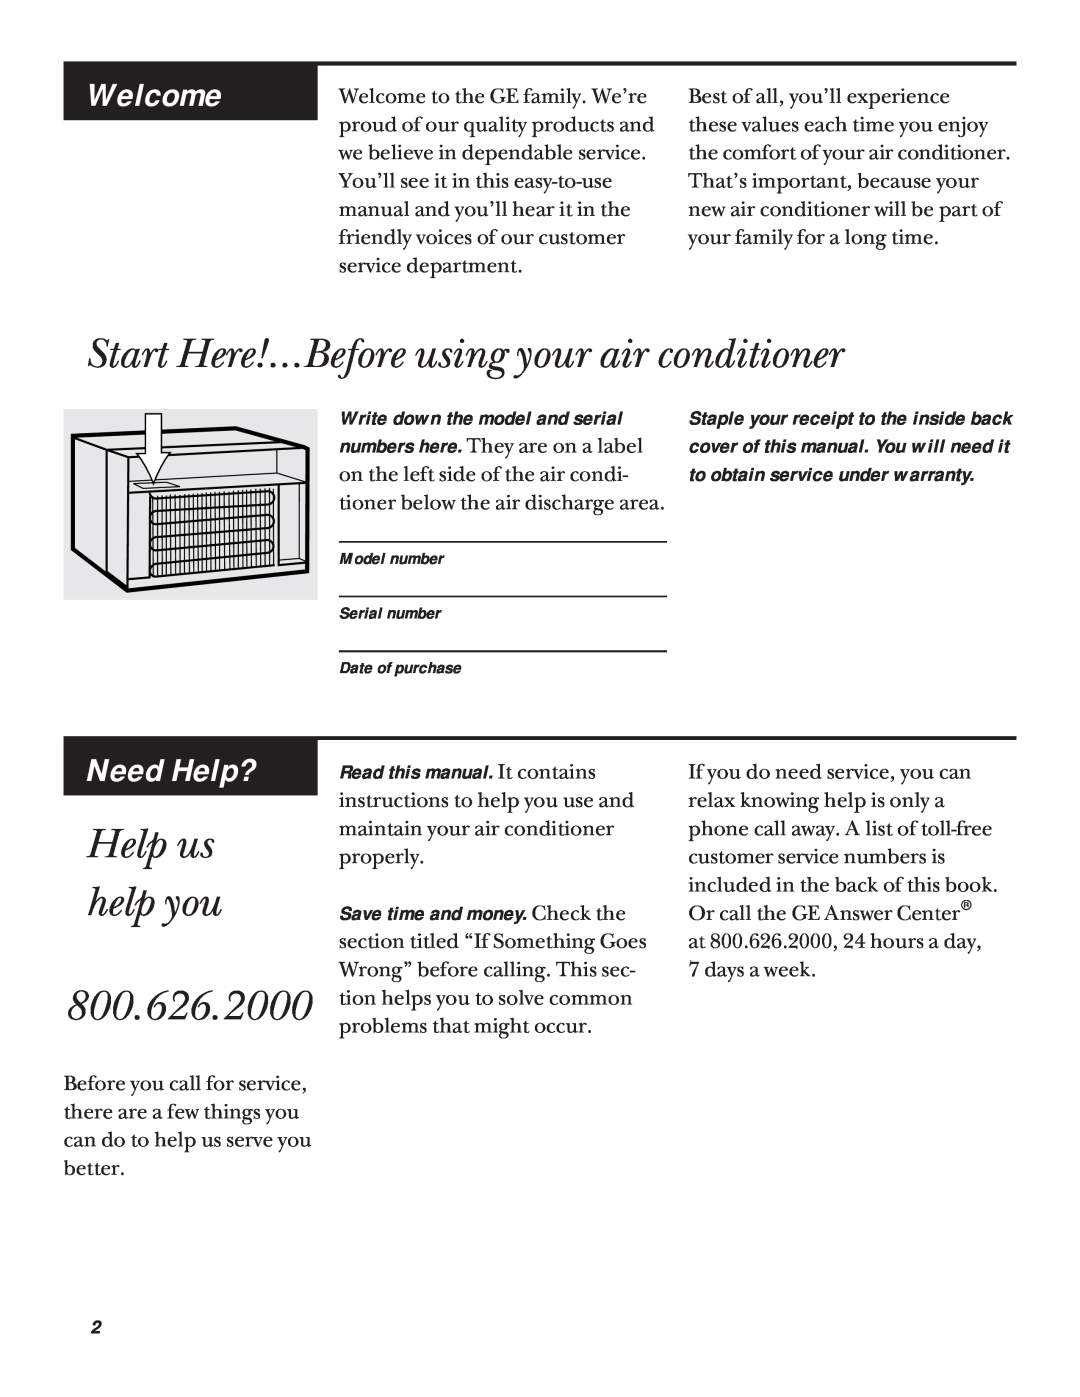 GE ABN08, ABV10, ABN10 Start Here!…Before using your air conditioner, 800.626.2000, Help us help you, Welcome, Need Help? 